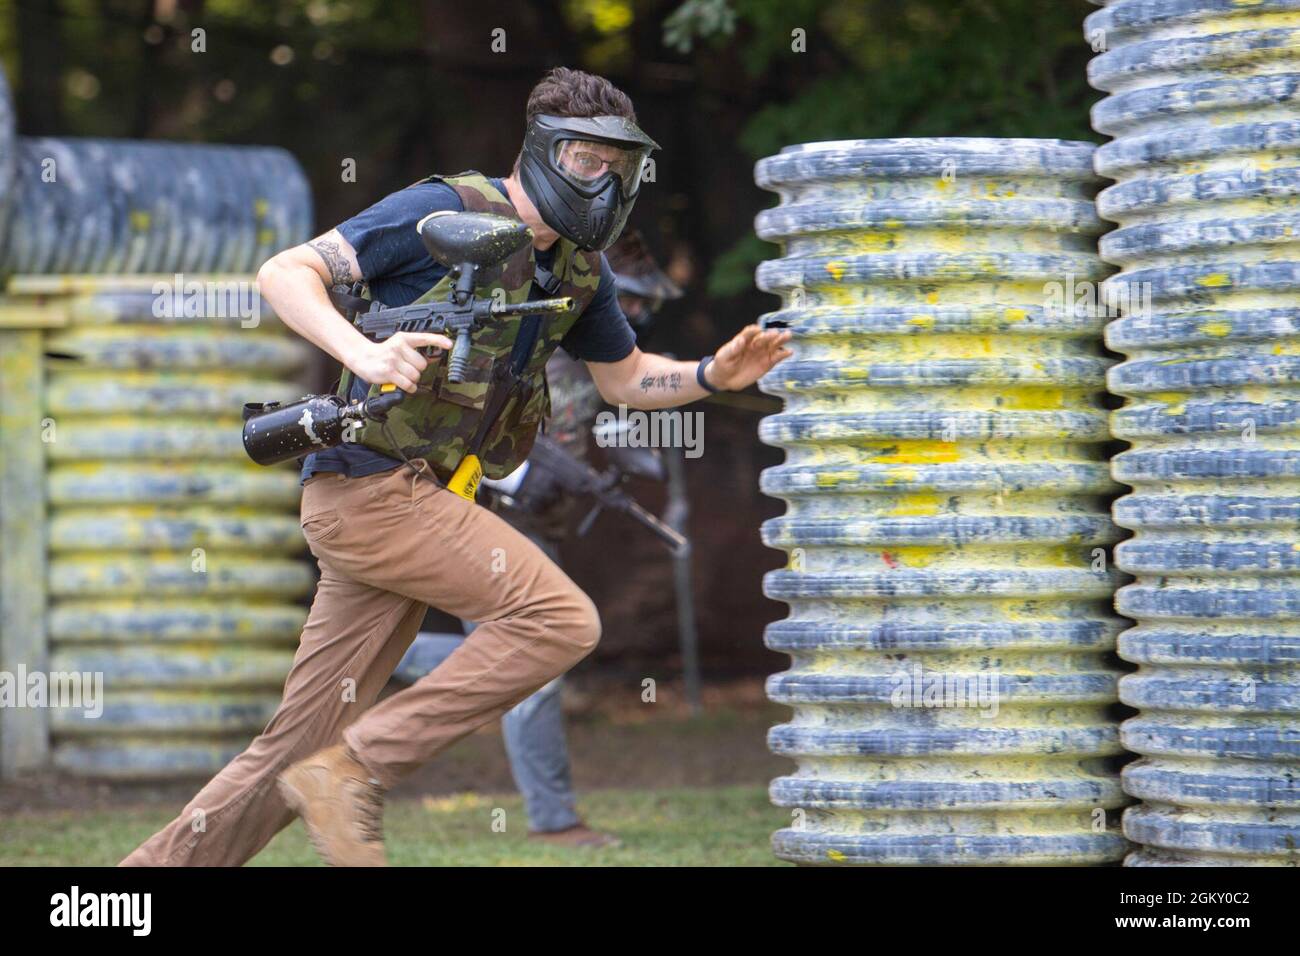 U.S. Navy Logistics Specialist 3rd Class Bailey Stephenson, from Longmont, Colorado, assigned to the aircraft carrier USS John C. Stennis (CVN 74), sprints to cover on a paintball field during a Morale, Welfare, and Recreation event, in Hampton, Virginia, July 22, 2021. John C. Stennis is in Newport News Shipyard working alongside NNS, NAVSEA and contractors conducting Refueling and Complex Overhaul as part of the mission to deliver the warship back in the fight, on time and on budget, to resume its duty of defending the United States. Stock Photo